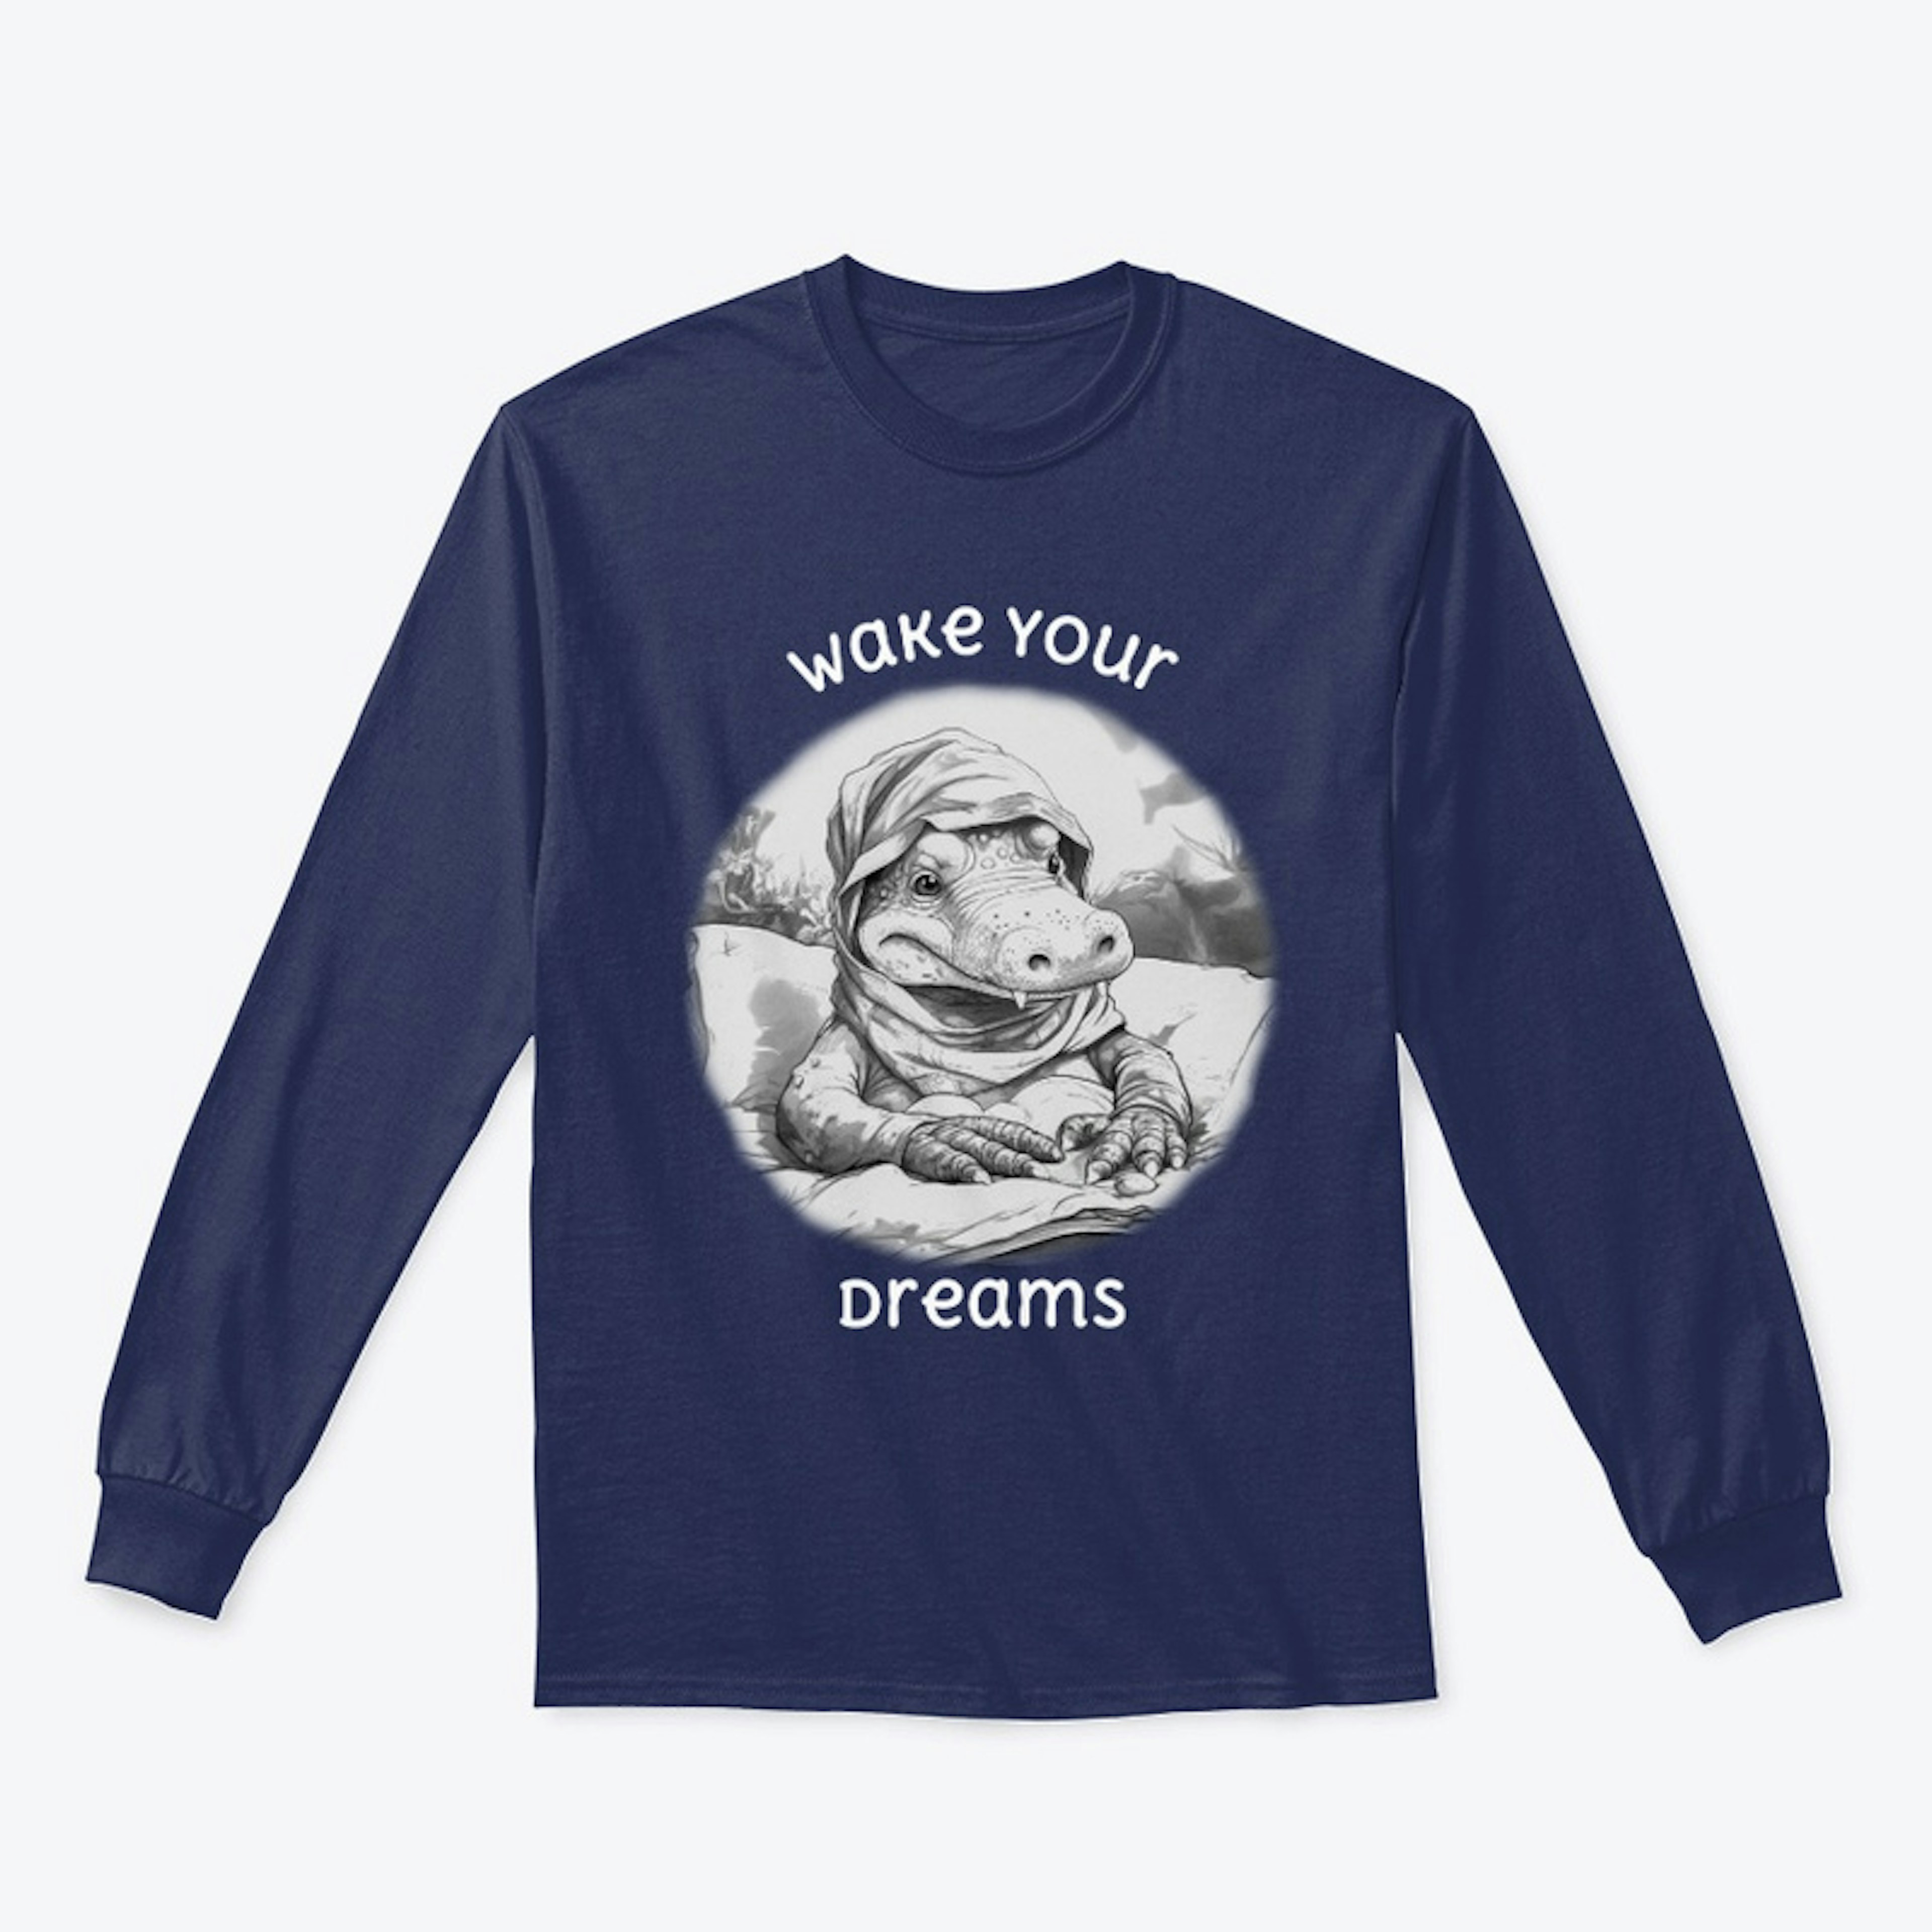 Wake your dreams